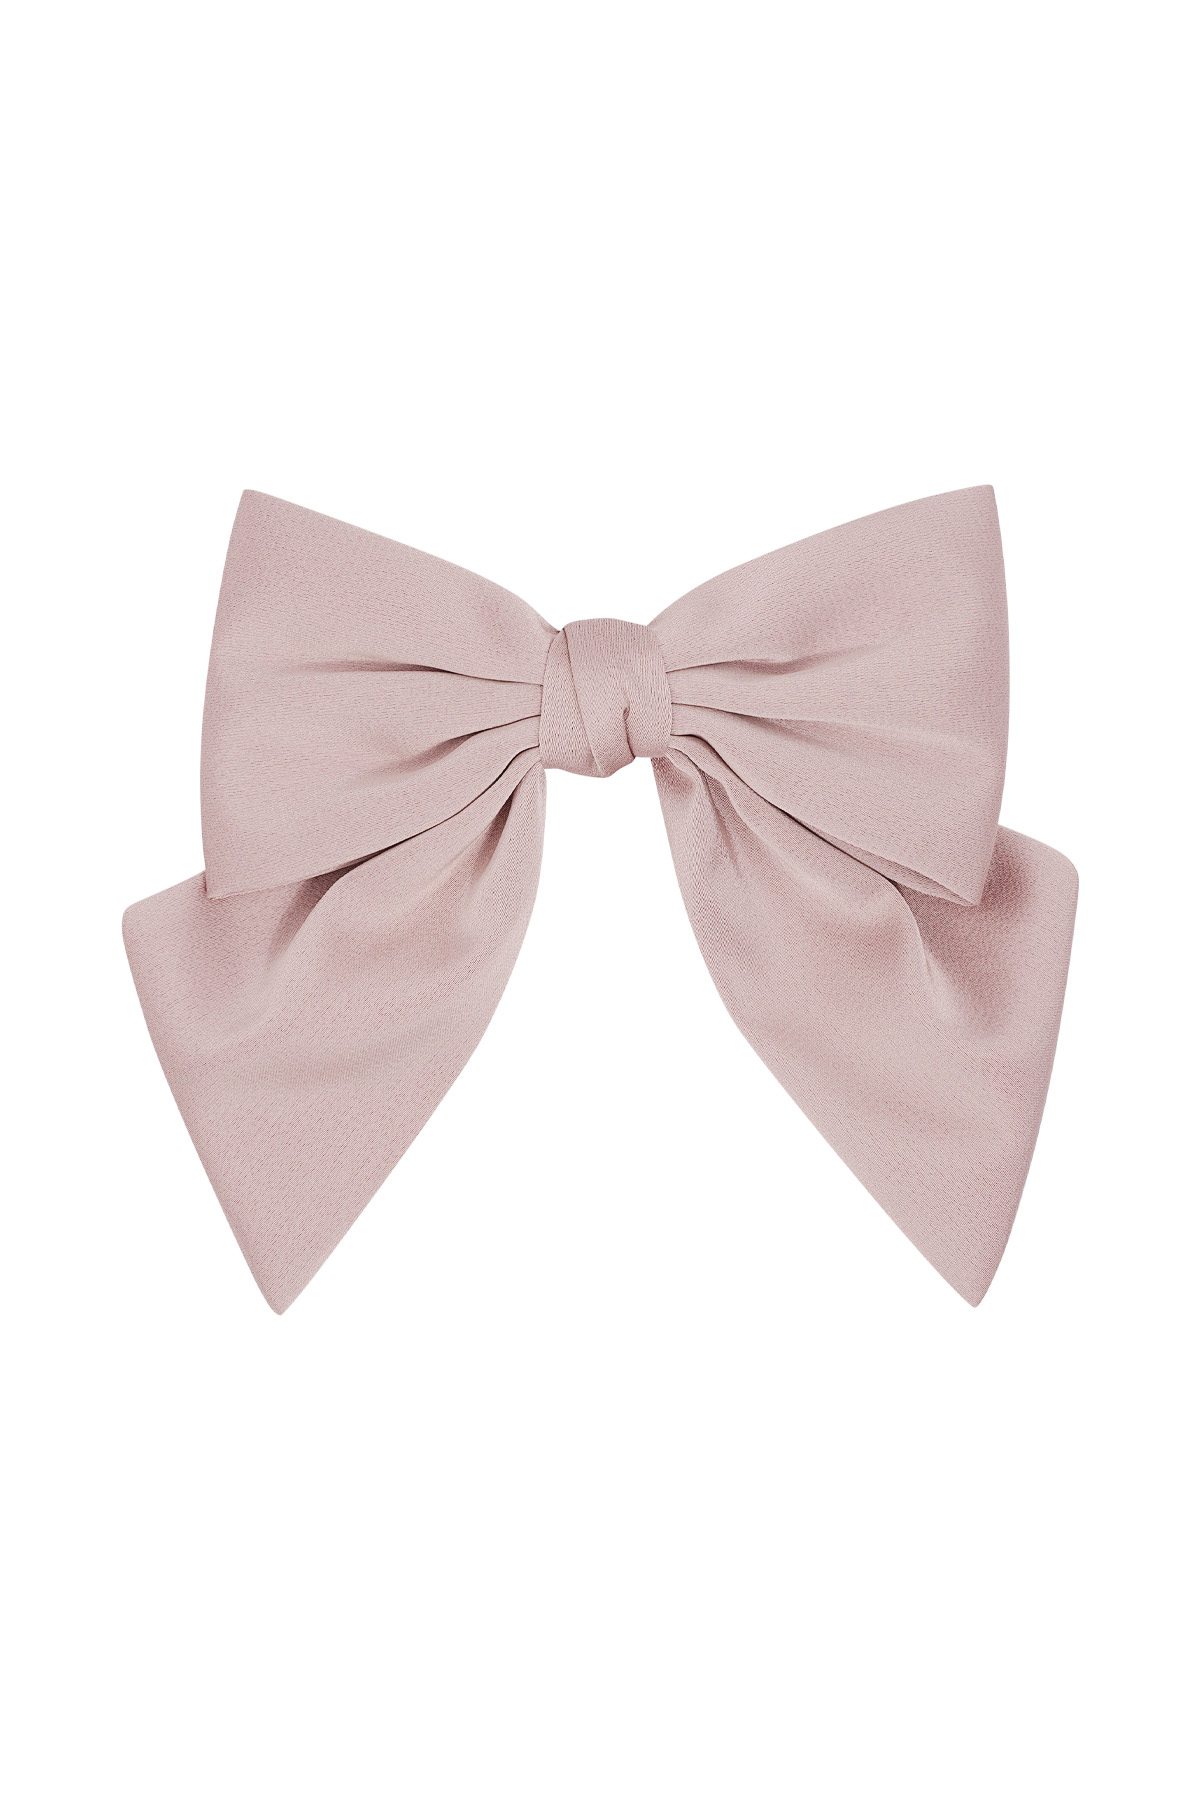 Simple hair bow - pink